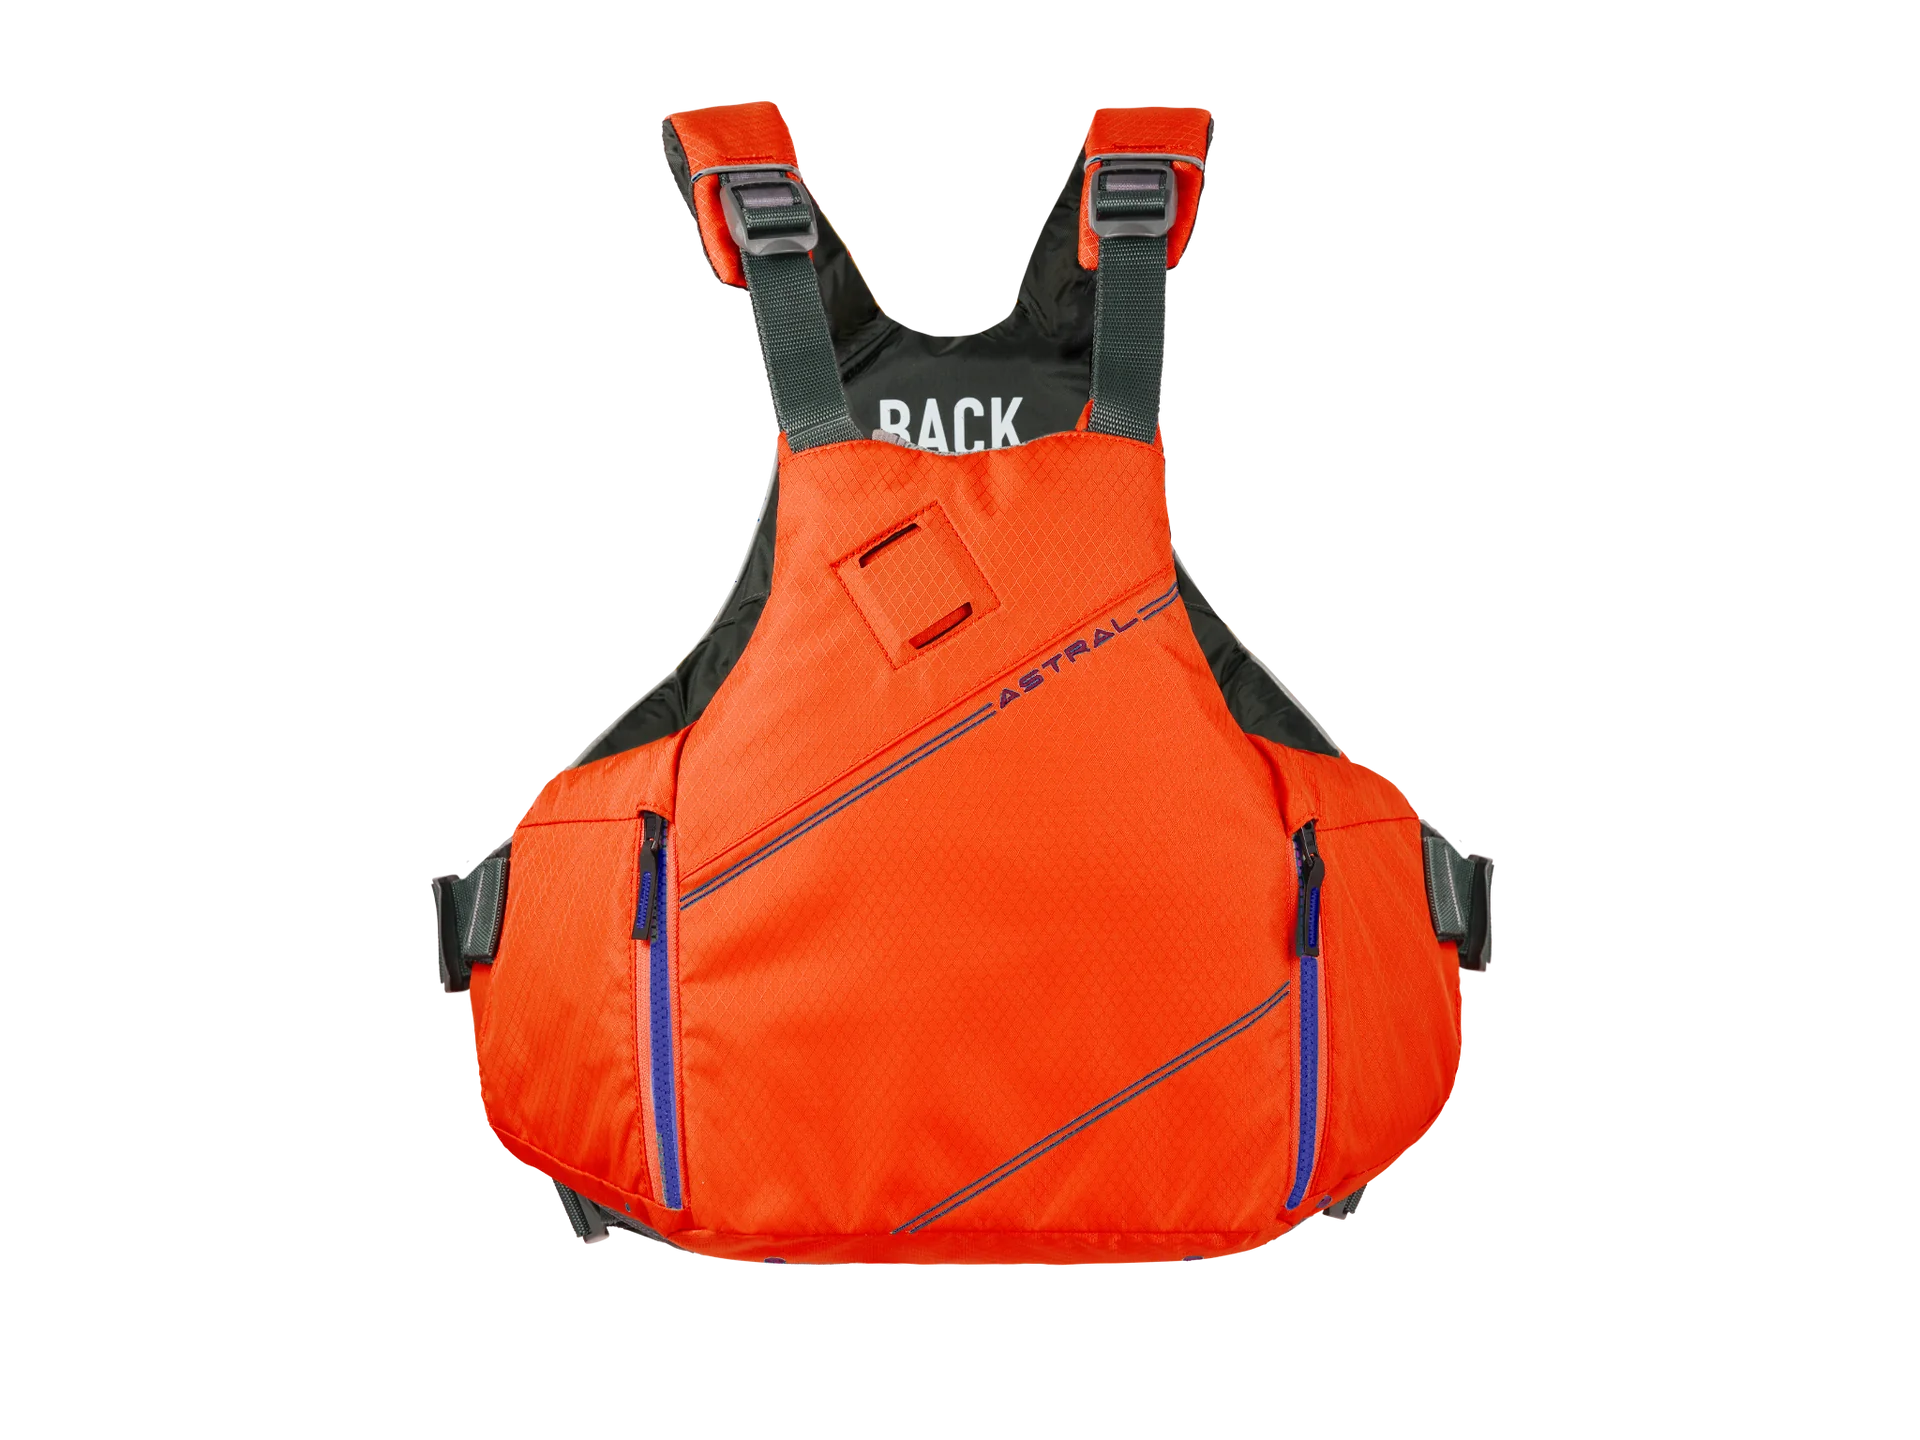 A PVC-free orange dinghy with the YTV 2.0 PFD from Astral brand on it.